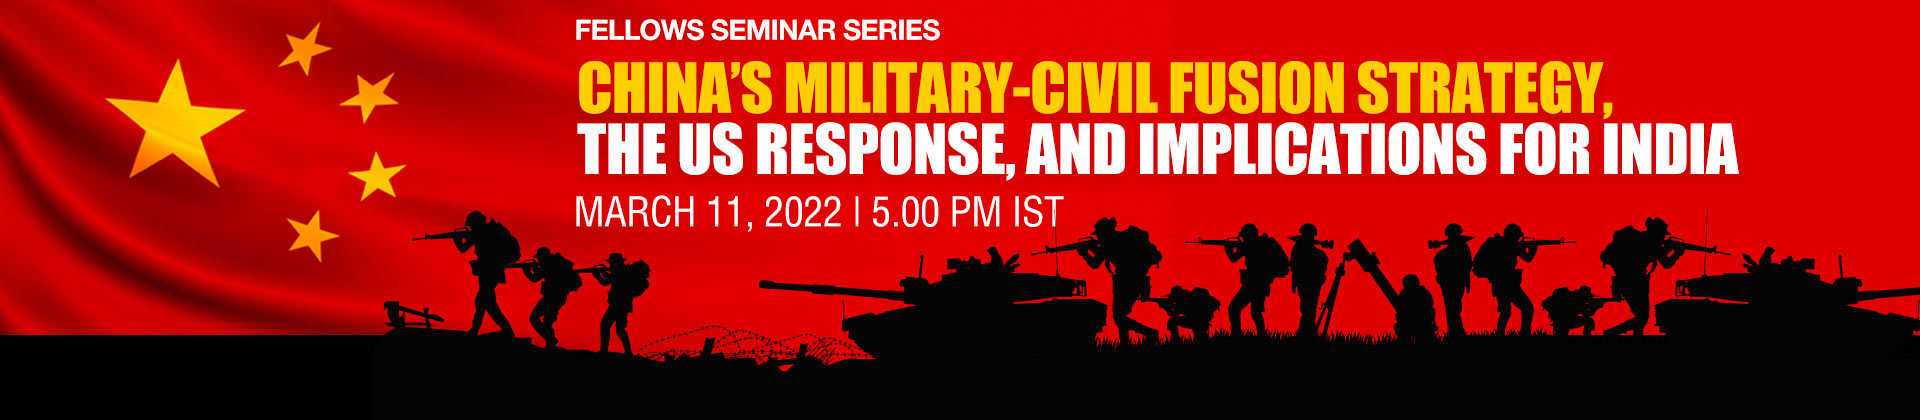 Fellows Seminar Series | China’s Military-Civil Fusion Strategy, the US Response, and Implications for India